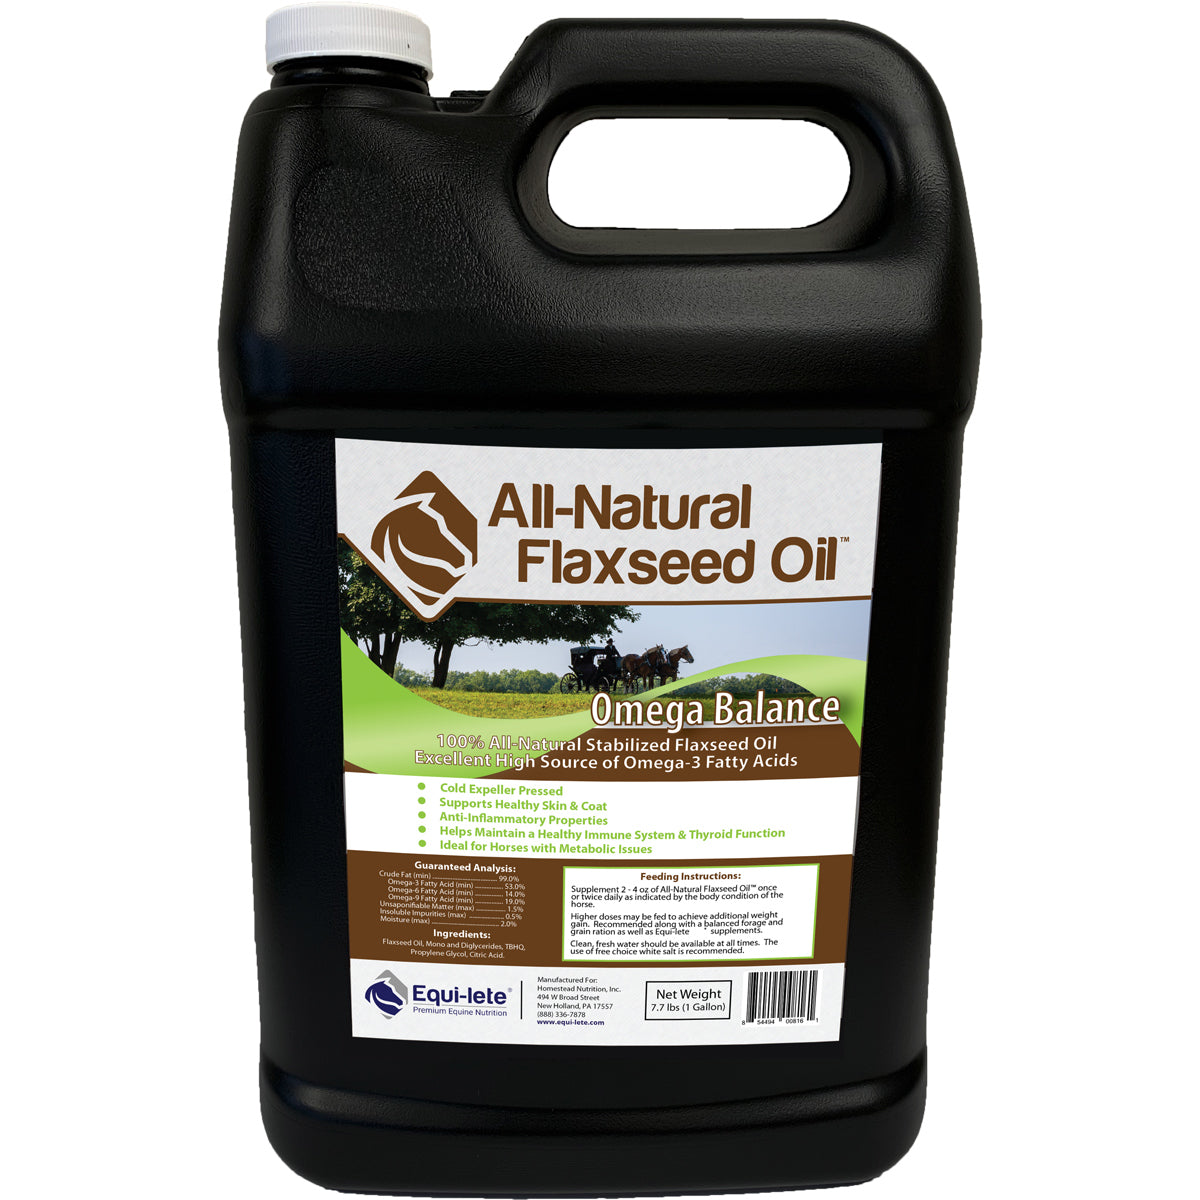 Equi-lete All-Natural Flaxseed Oil Gallon